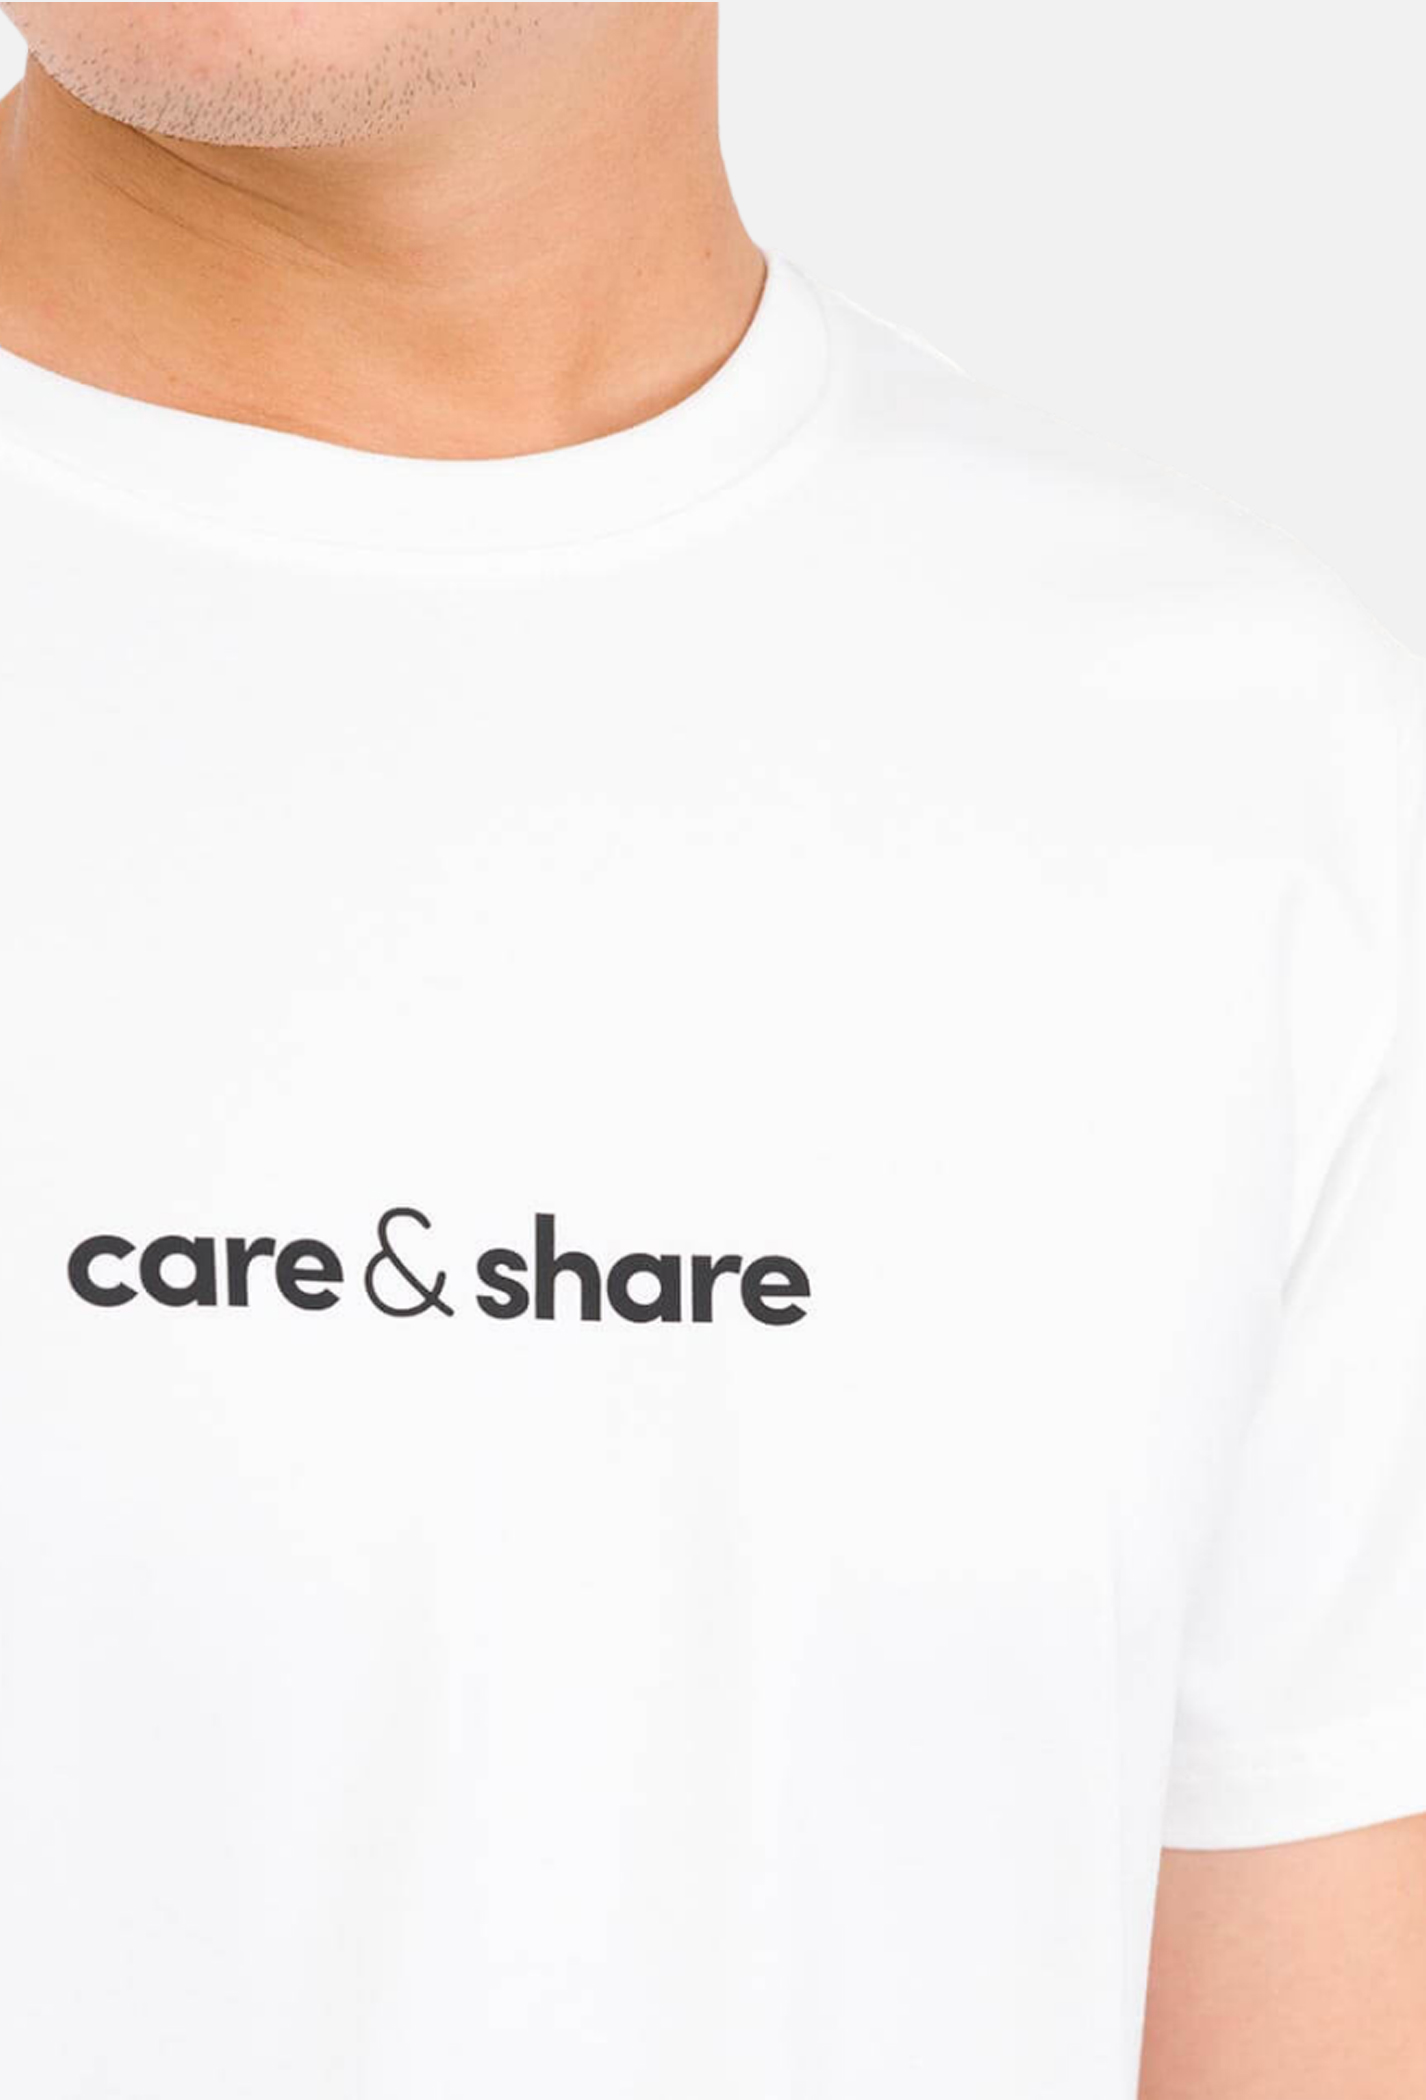 T-Shirt Care & Share in giữa  3